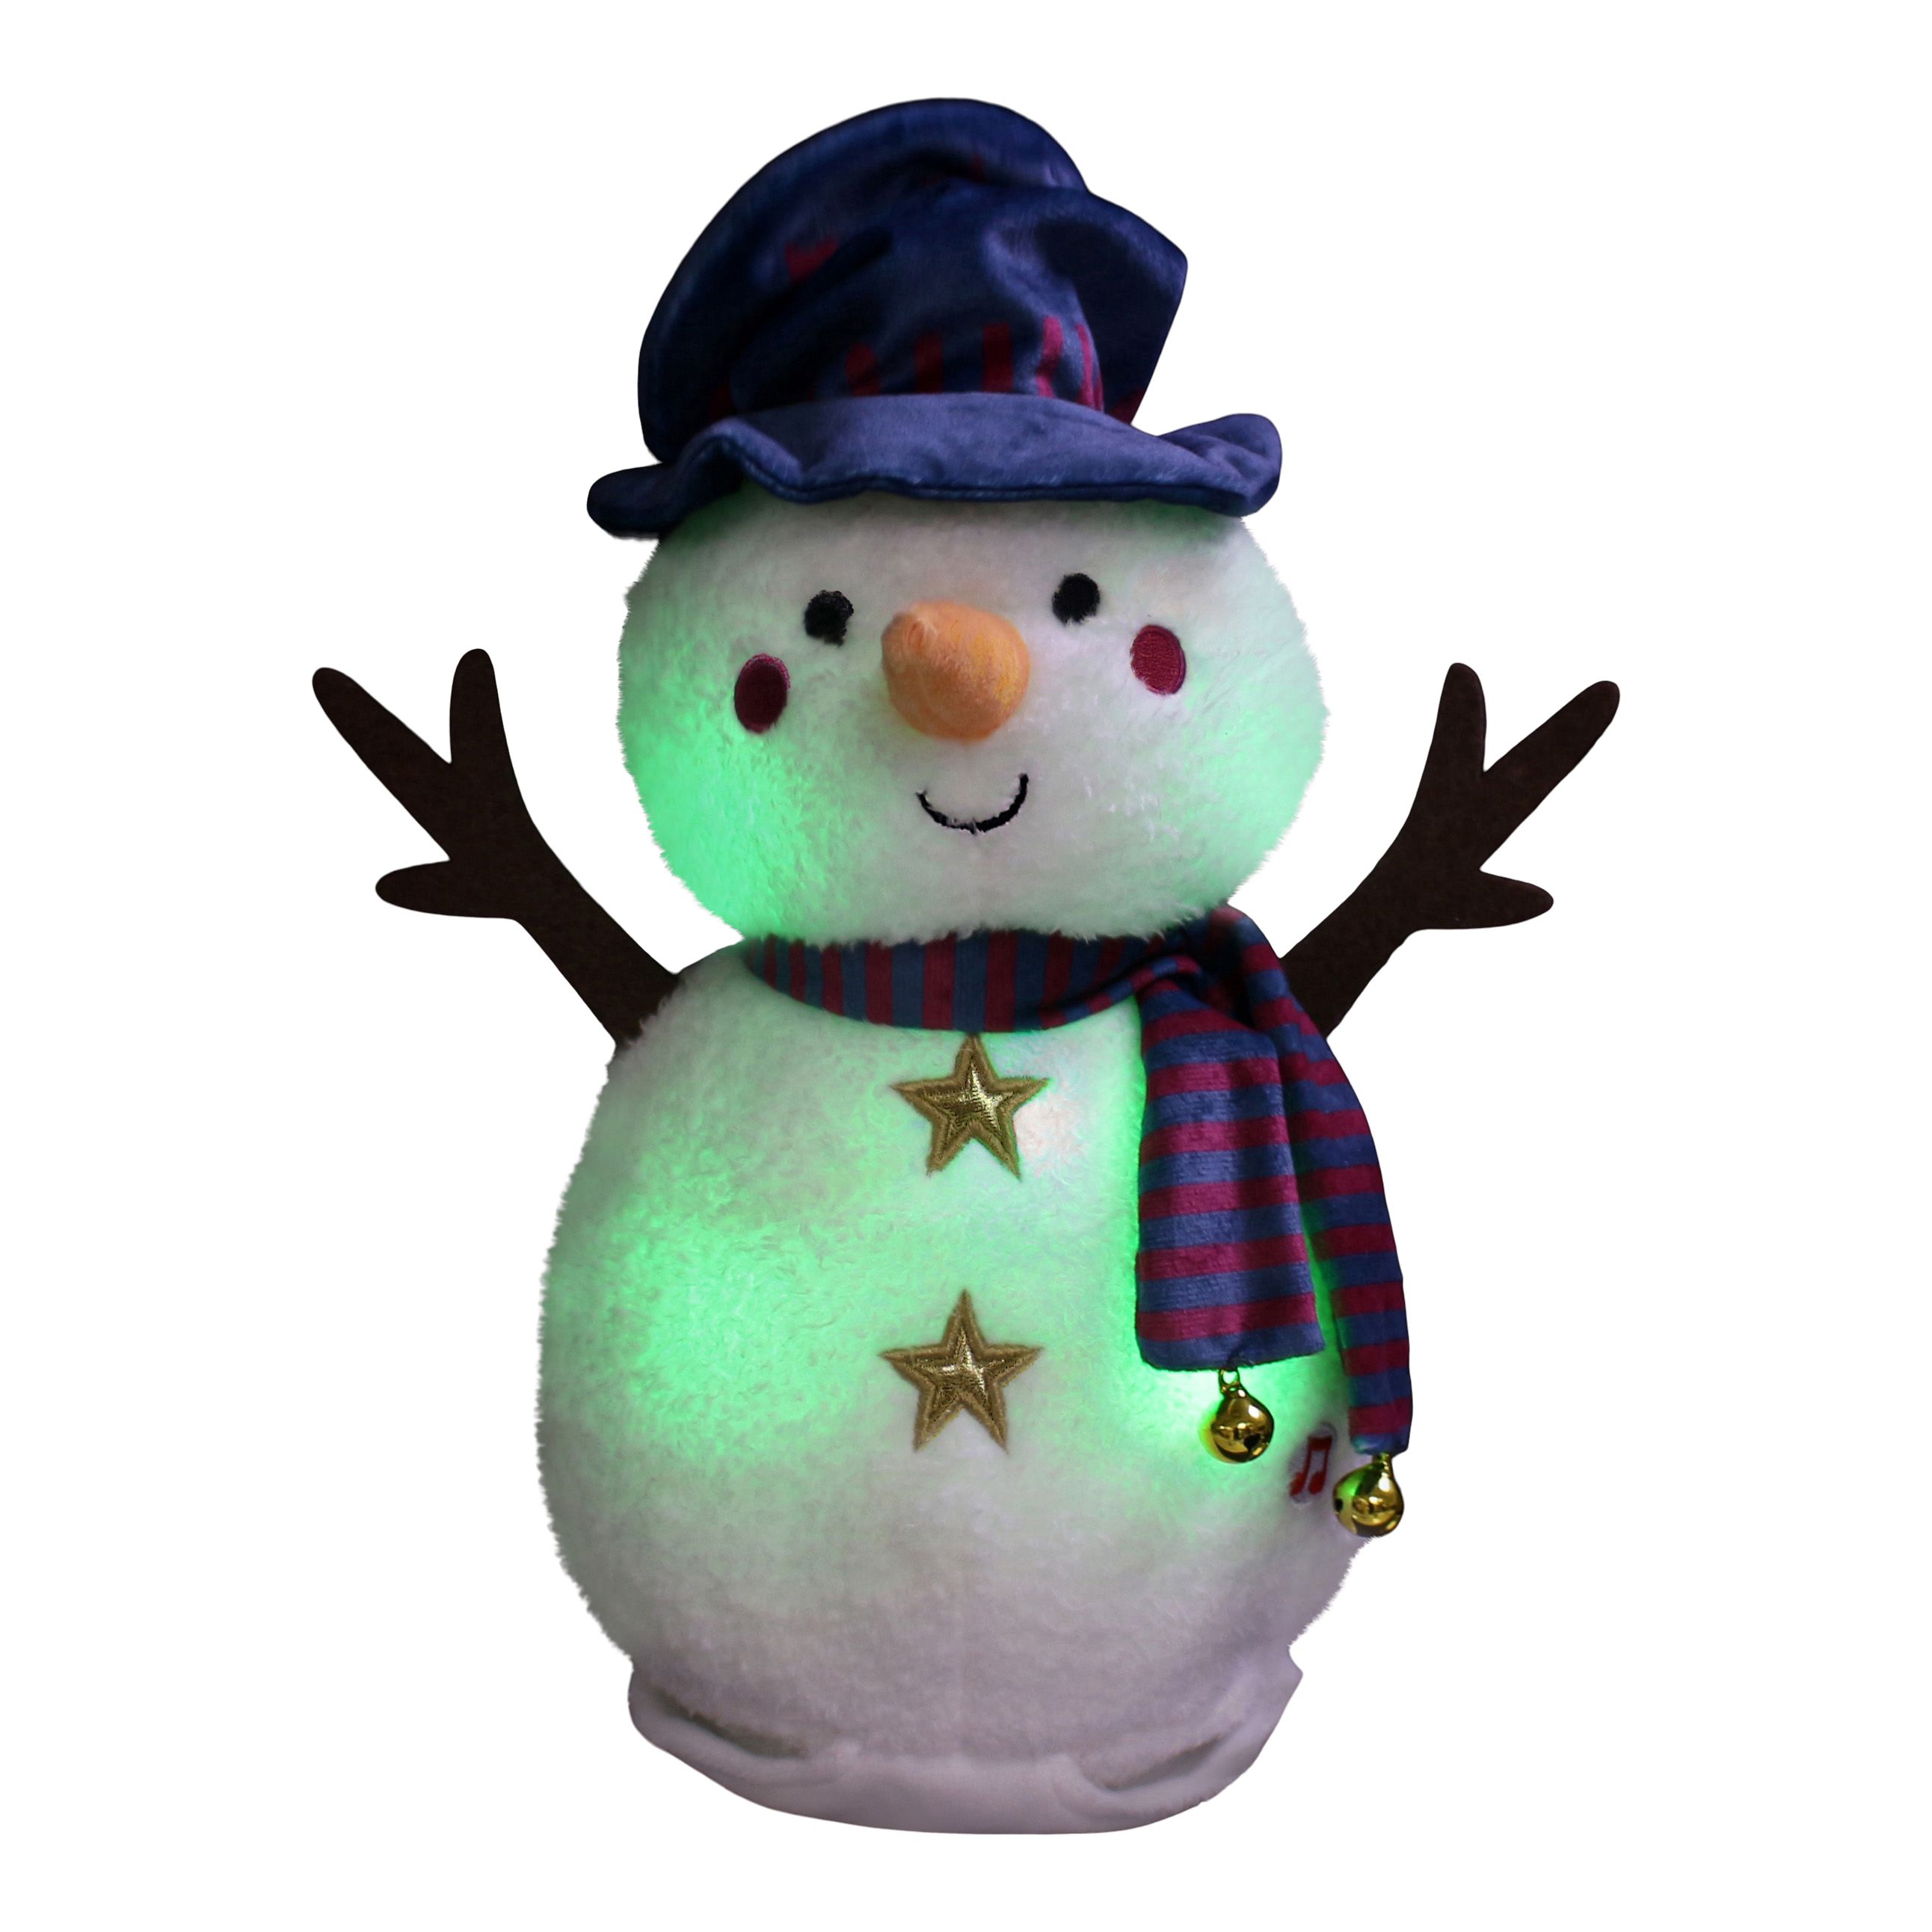 Battery-powered Moves up & down, colour changing Multicolour Snowman character